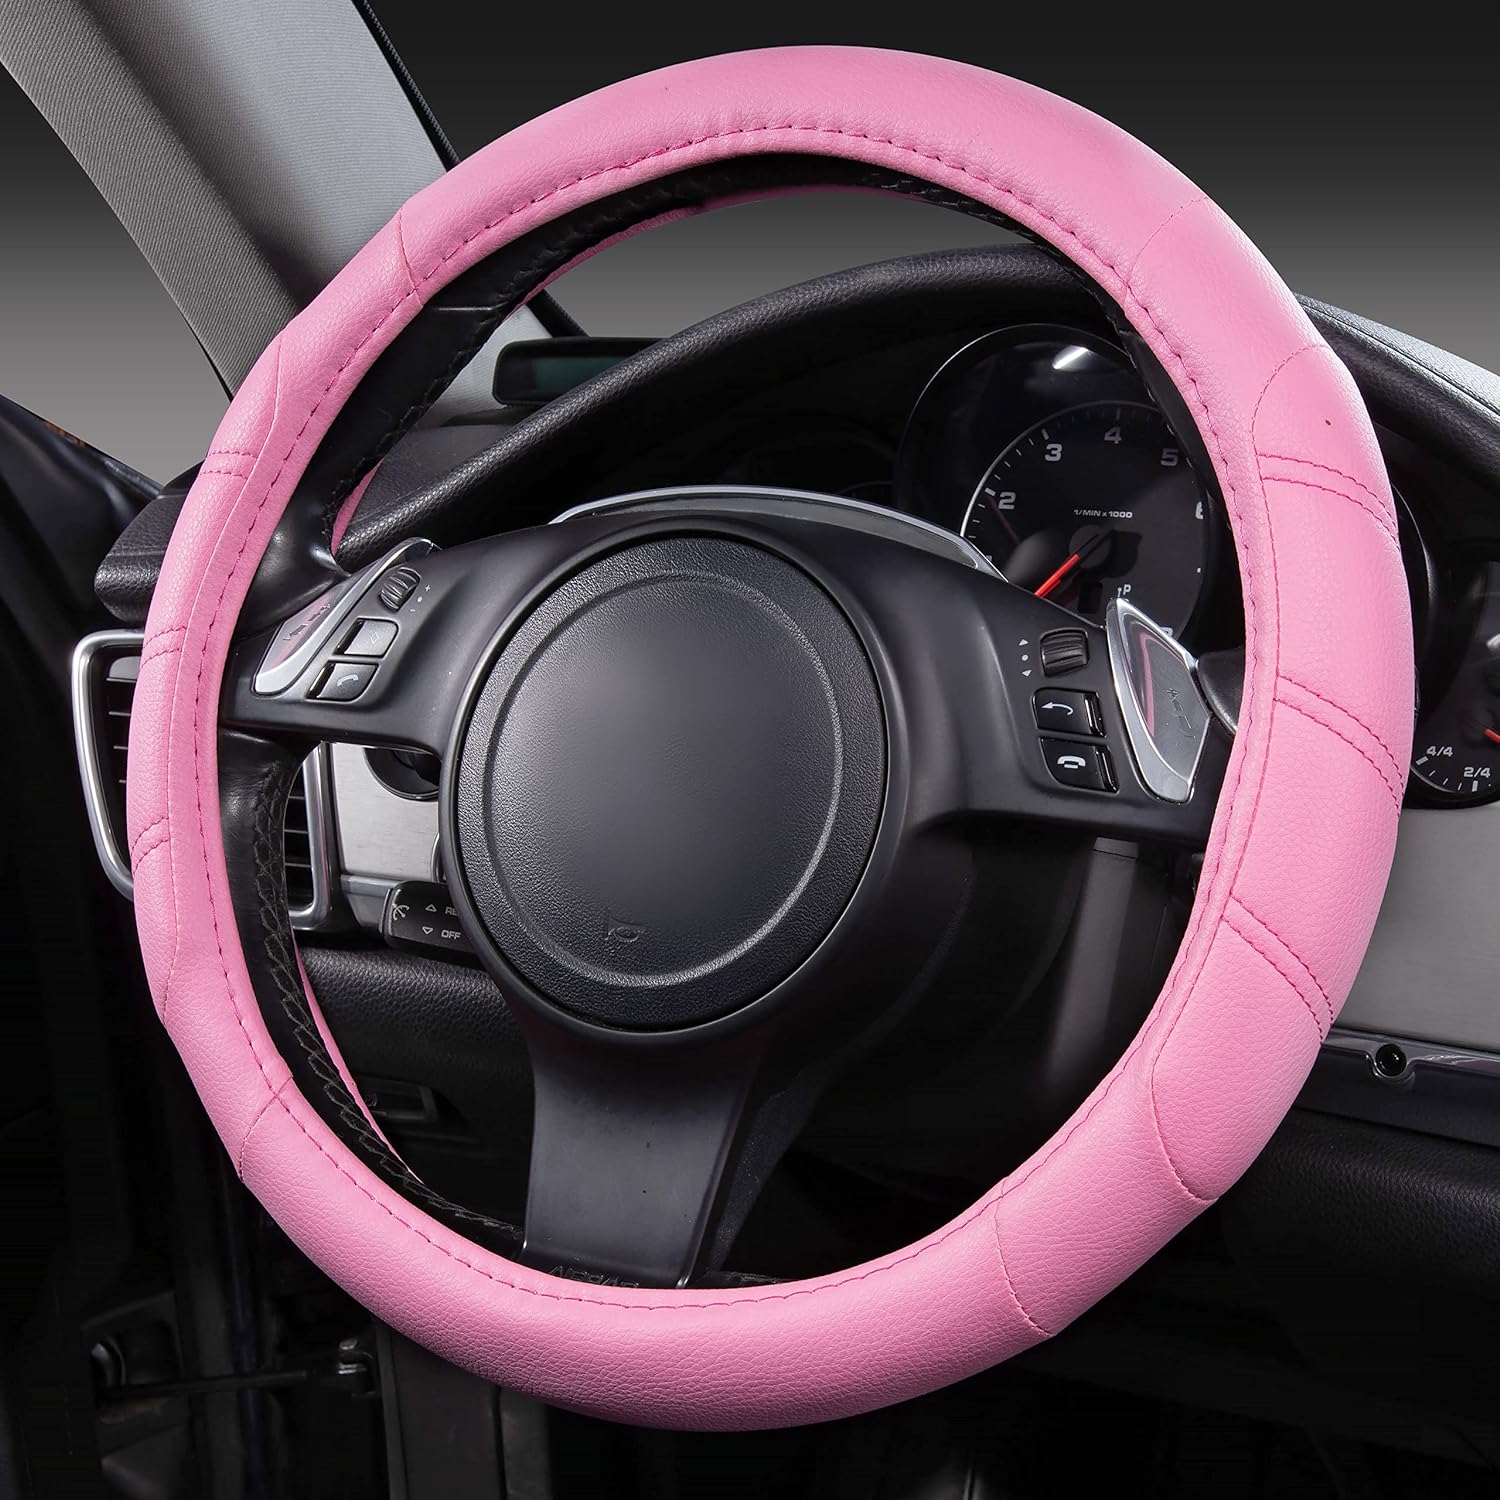 CAR PASS Barbie Pink Nappa Waterproof Leather Car Seat Covers Two Front Seat Bundle with Floor mats and Steering Wheel Cover